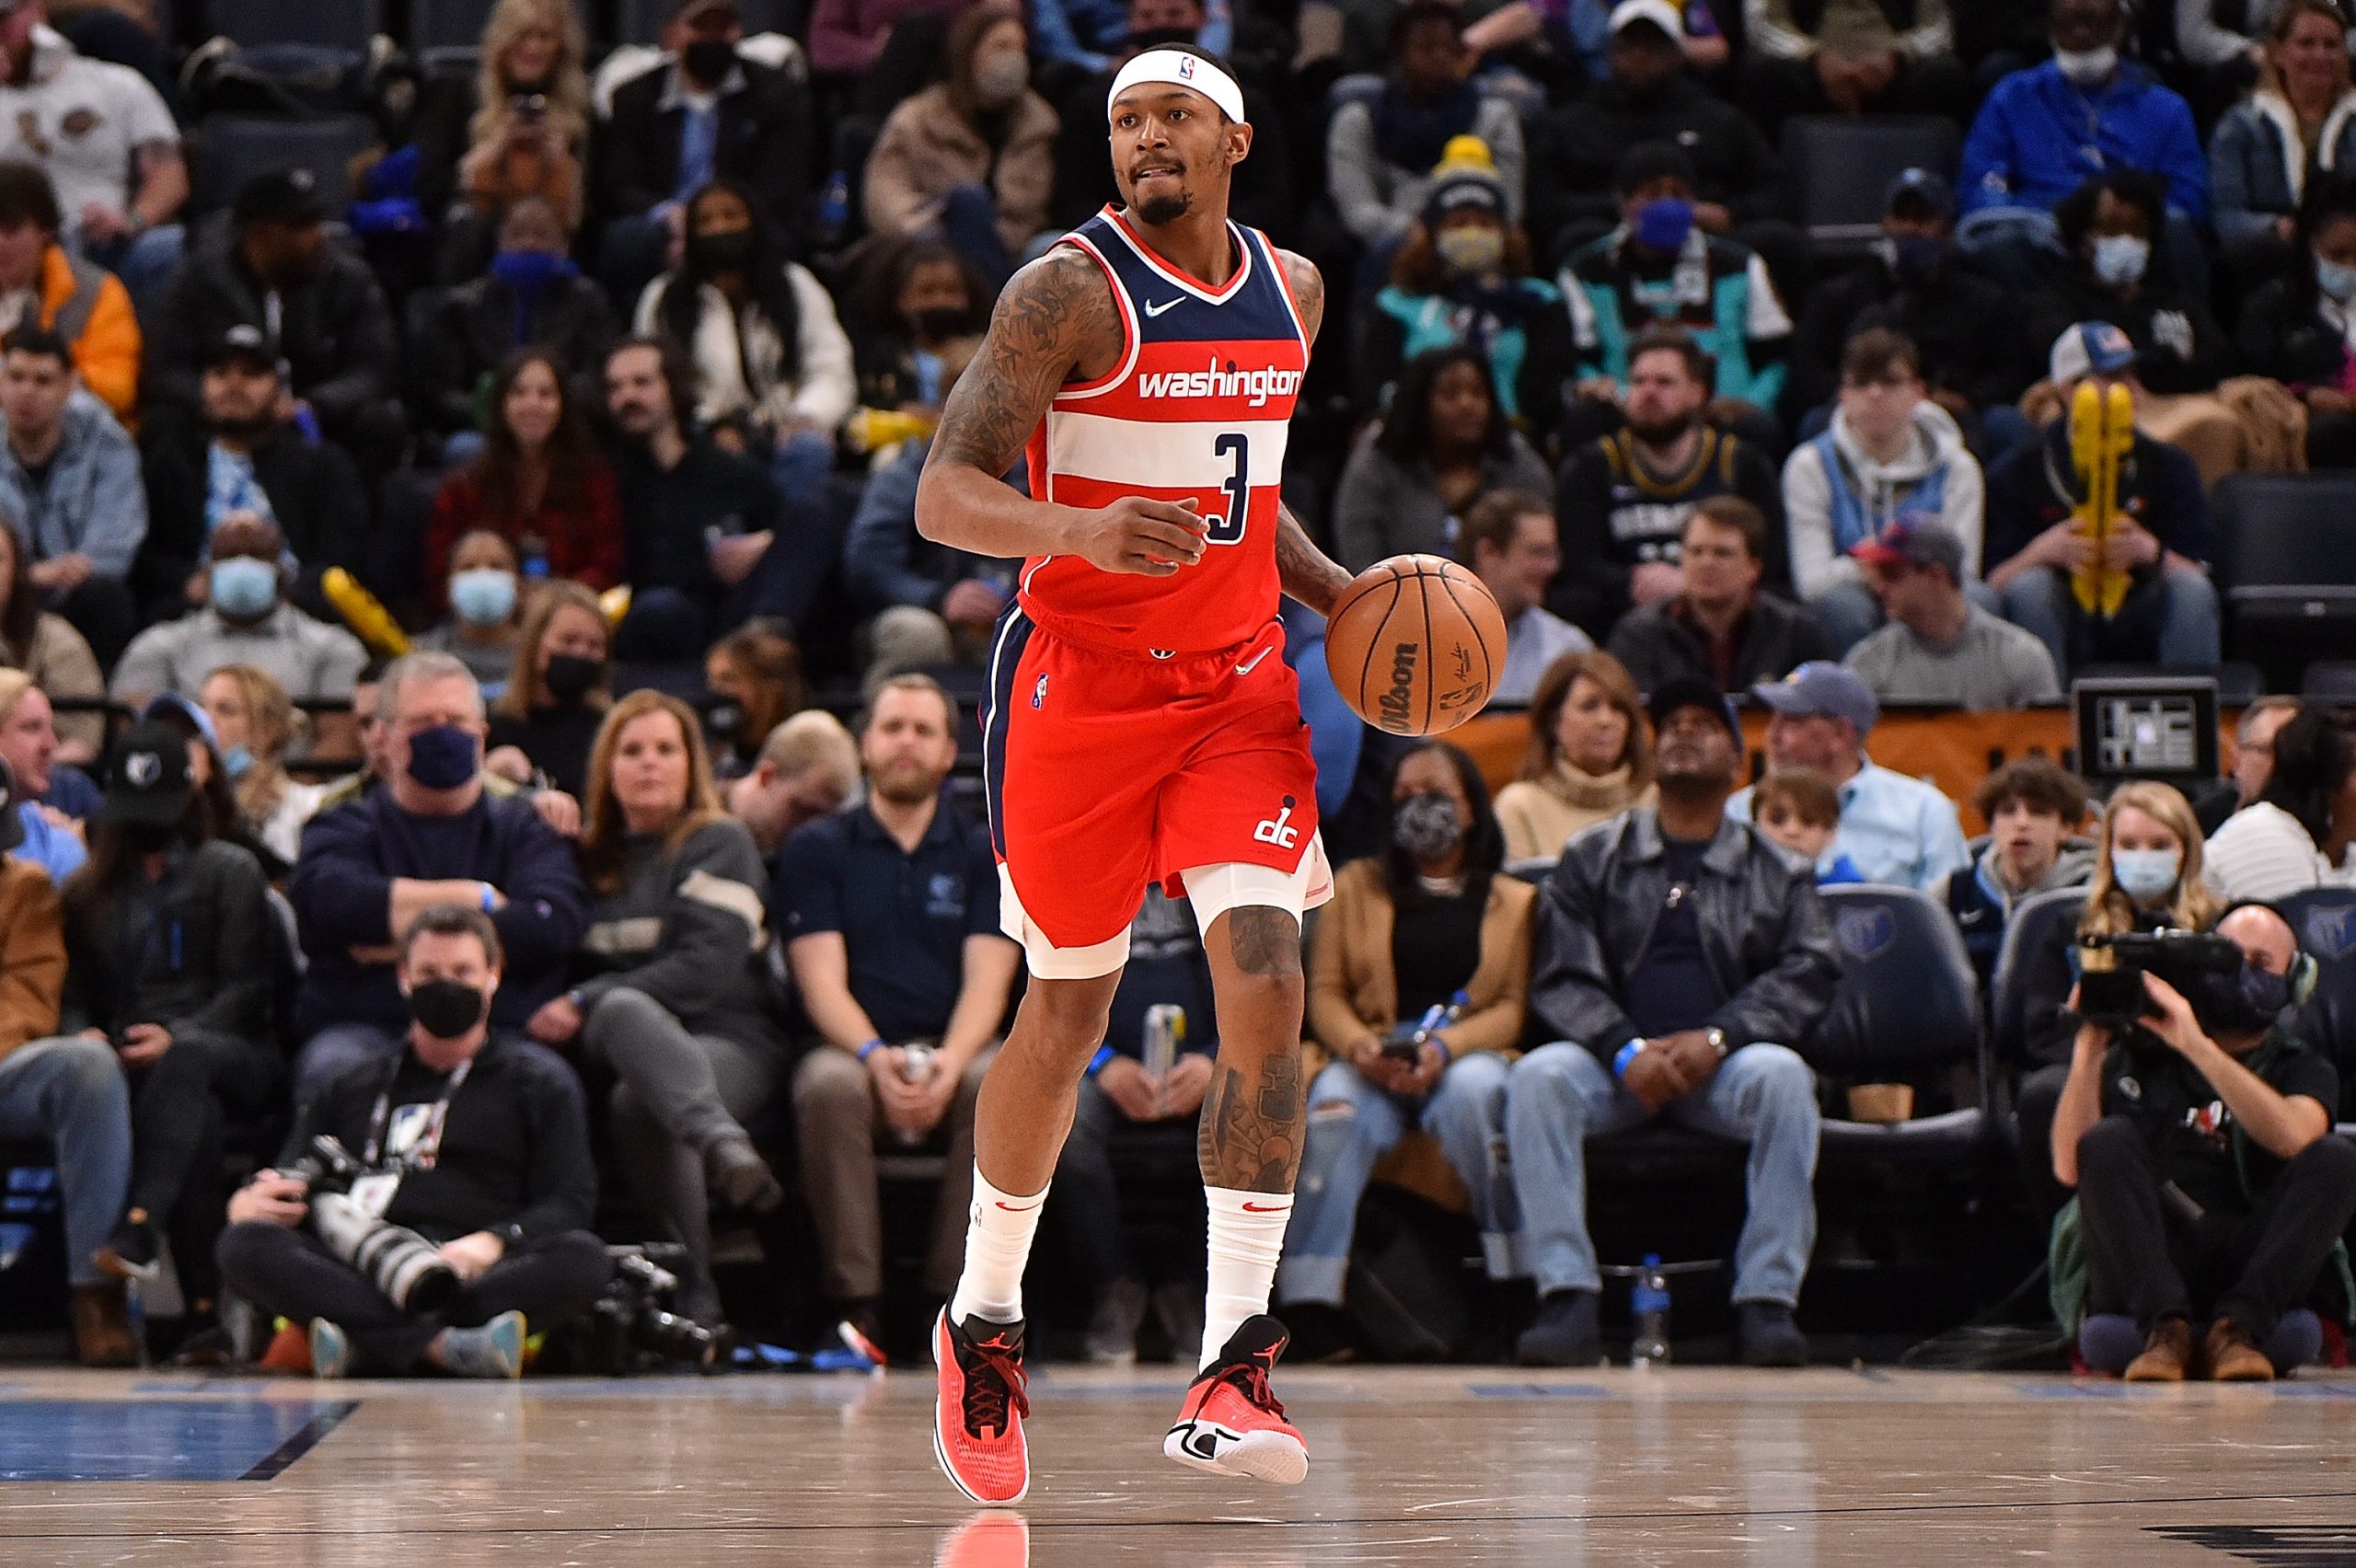 Bradley Beal Teams Up With Hoop For All to Refurbish D.C. Court